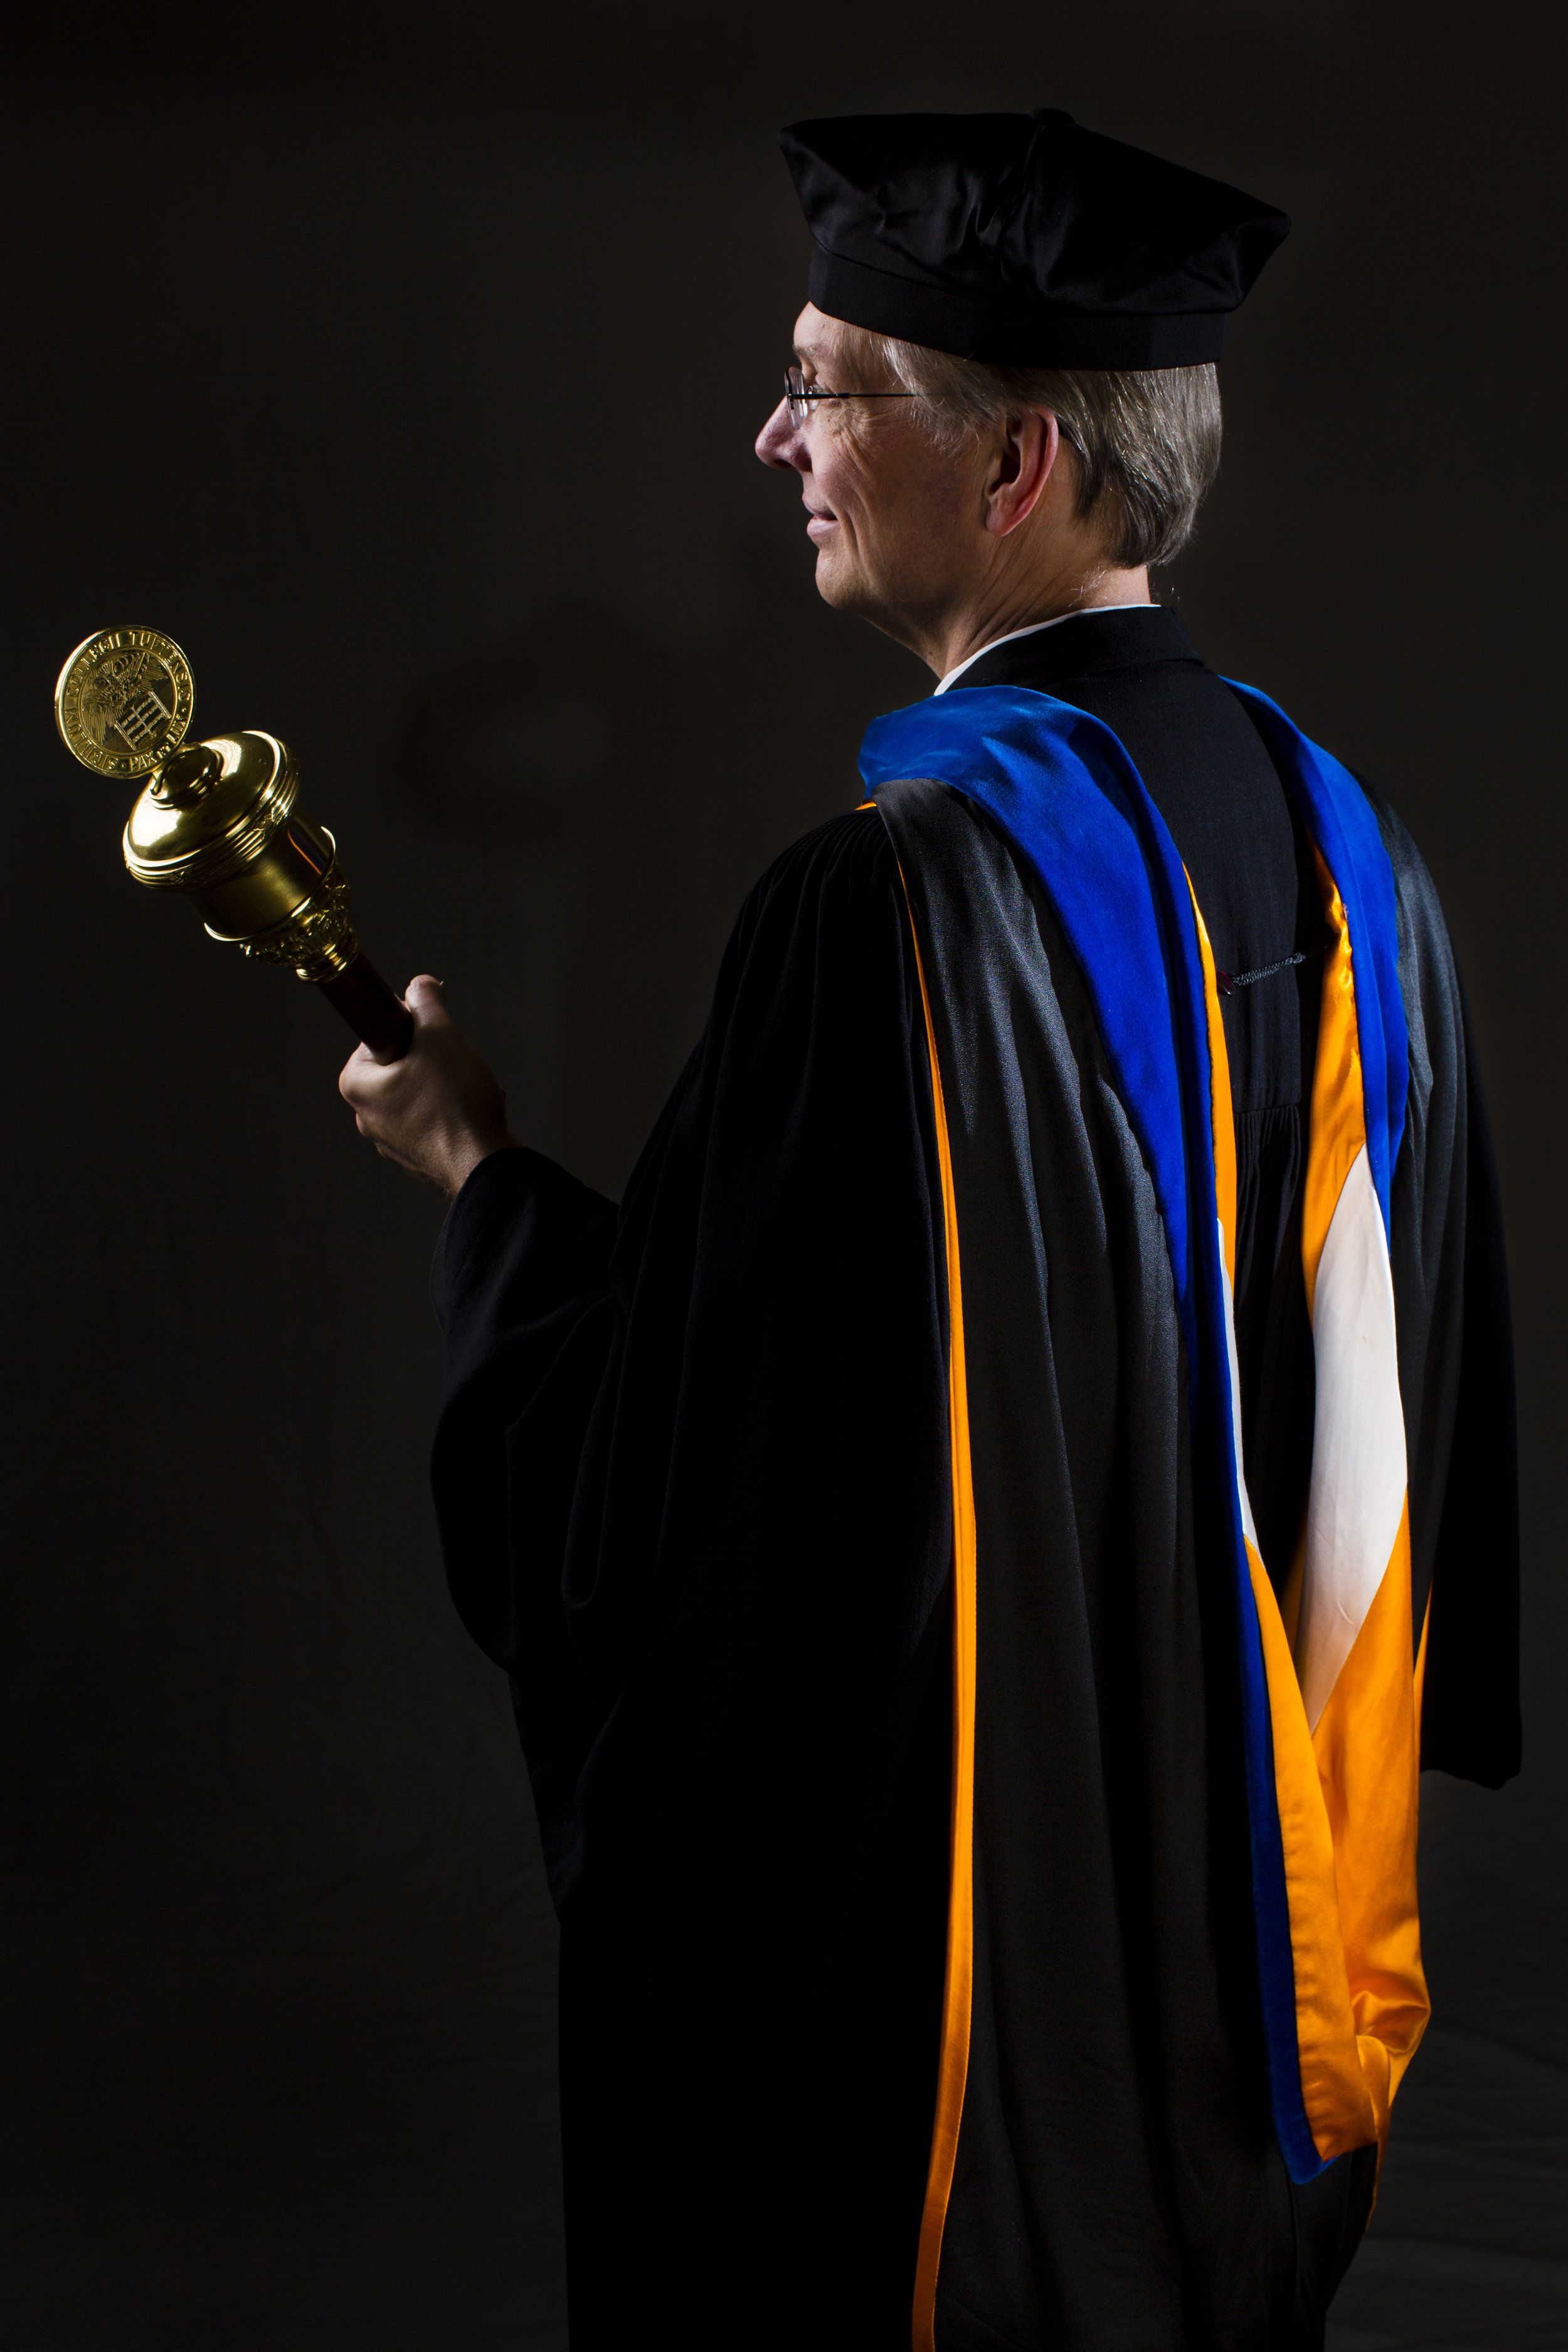  Professor of Mathematics Boris Hasselblatt poses here in the family heirloom he wears to every Commencement. “These are my father’s robes,” said Hasselblatt, whose father was a Lutheran pastor in Germany. “He passed away twenty years ago, and I’ve w